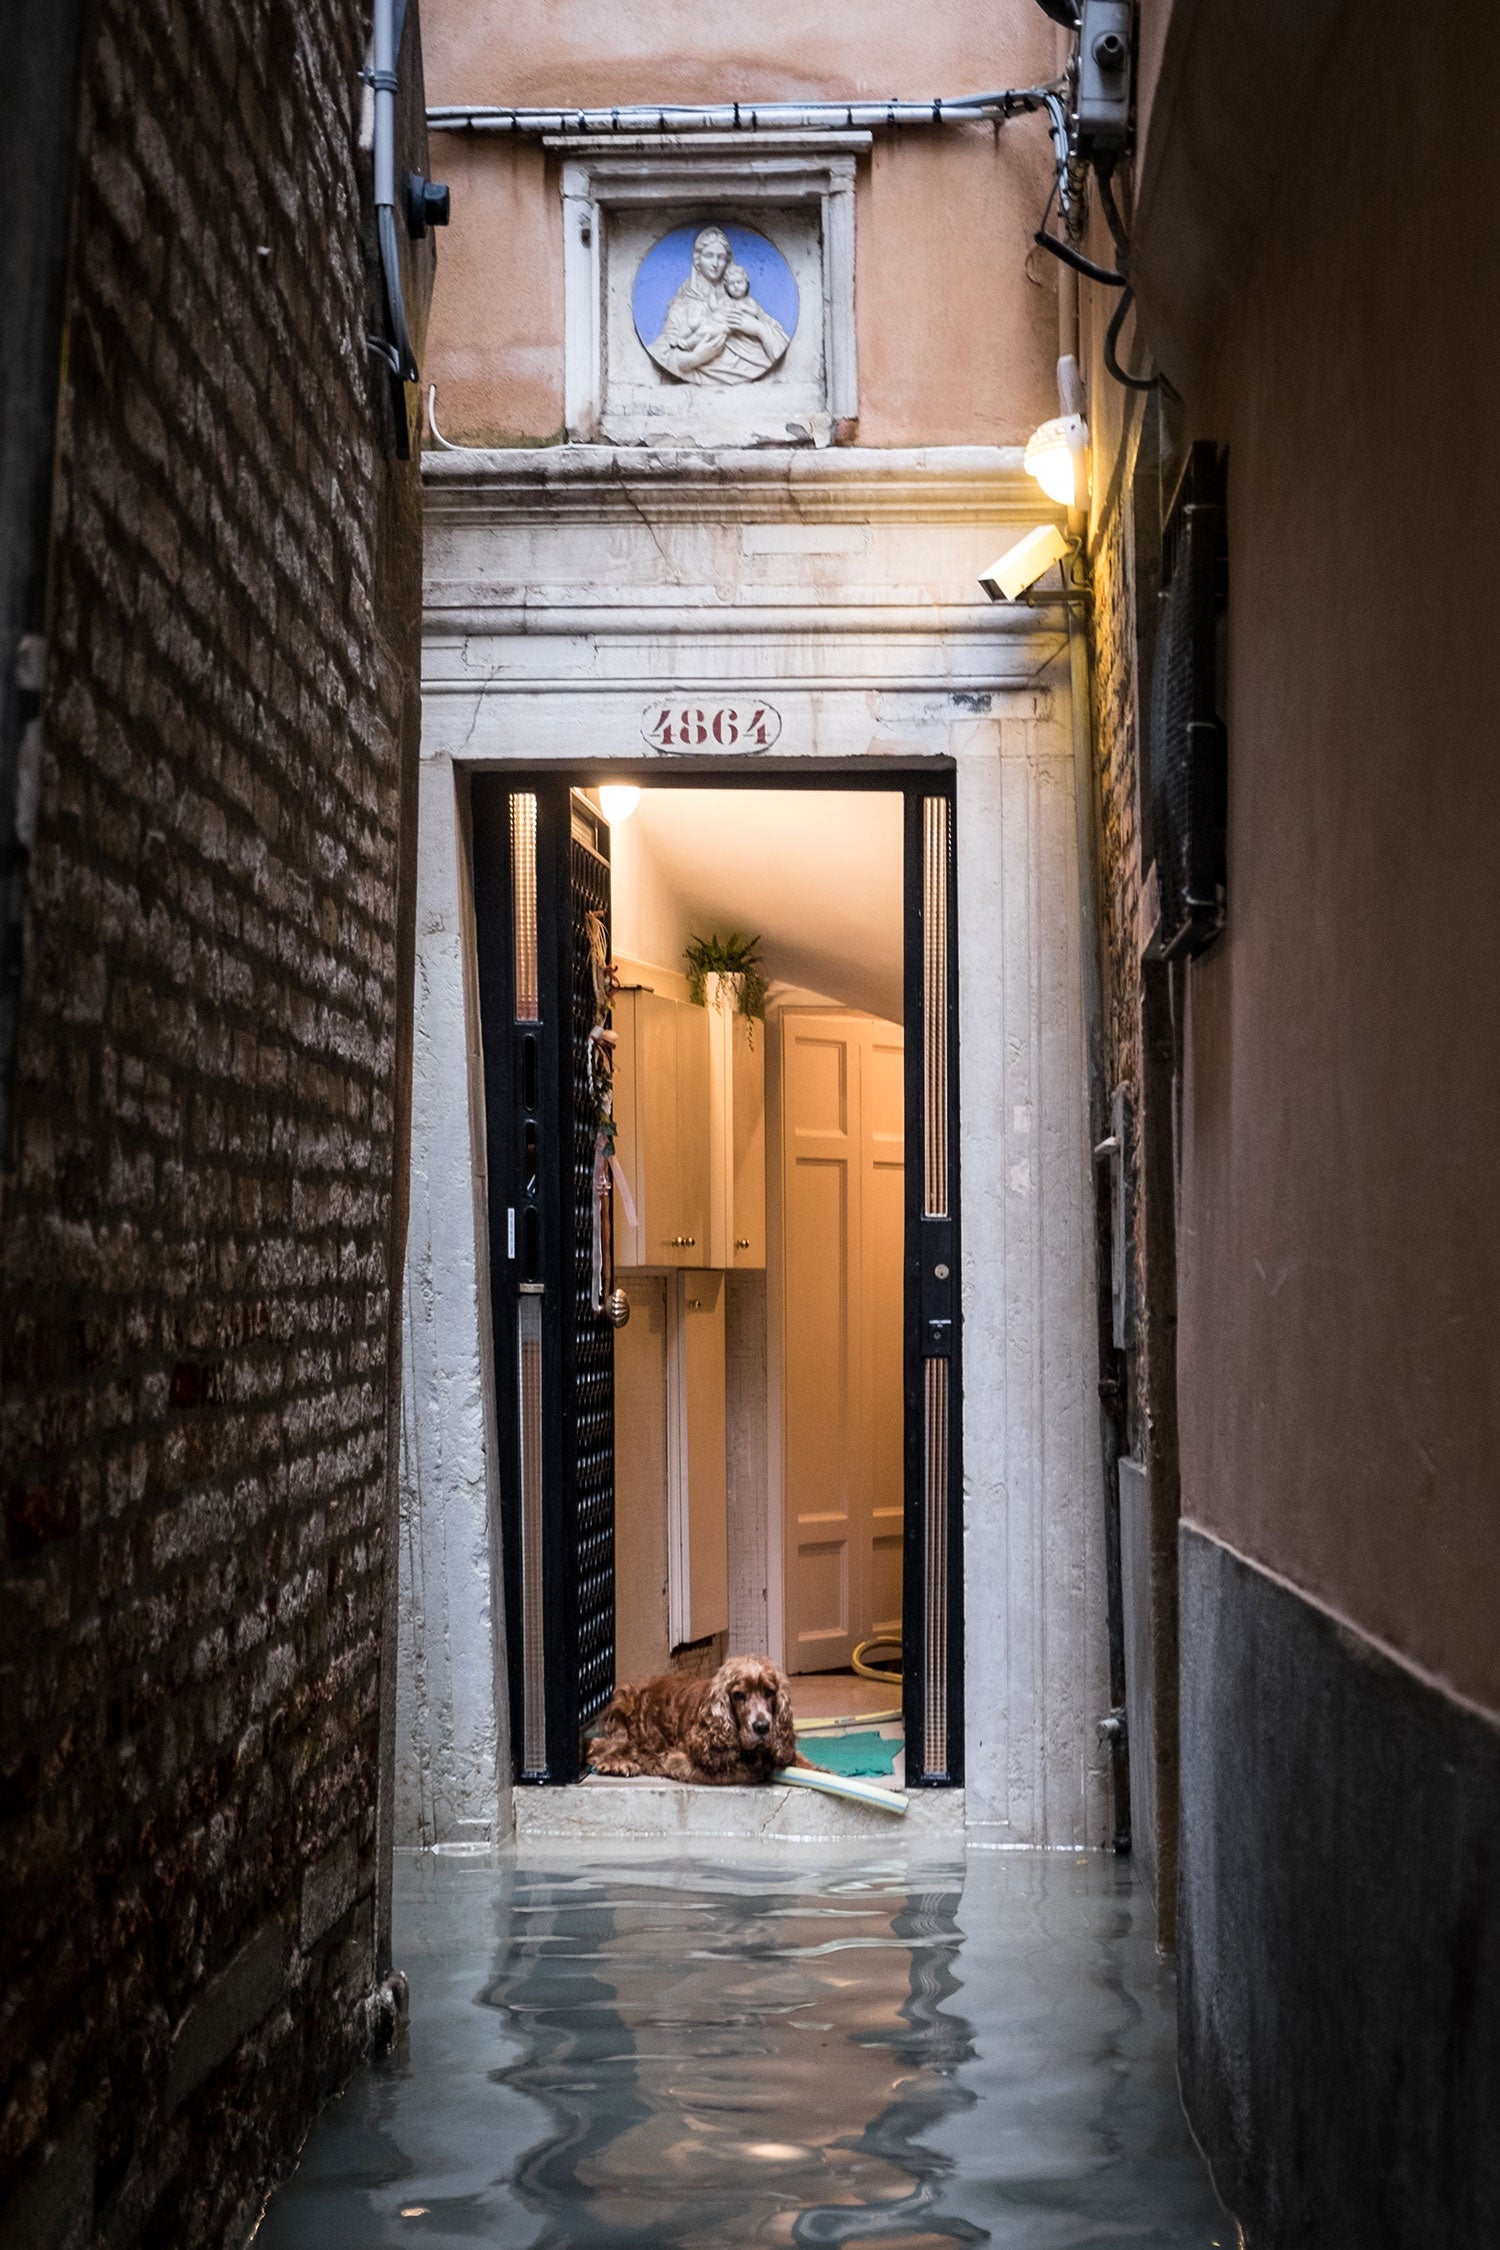 A dog at the door of a building observes the water filling the narrow city street in front of the building.